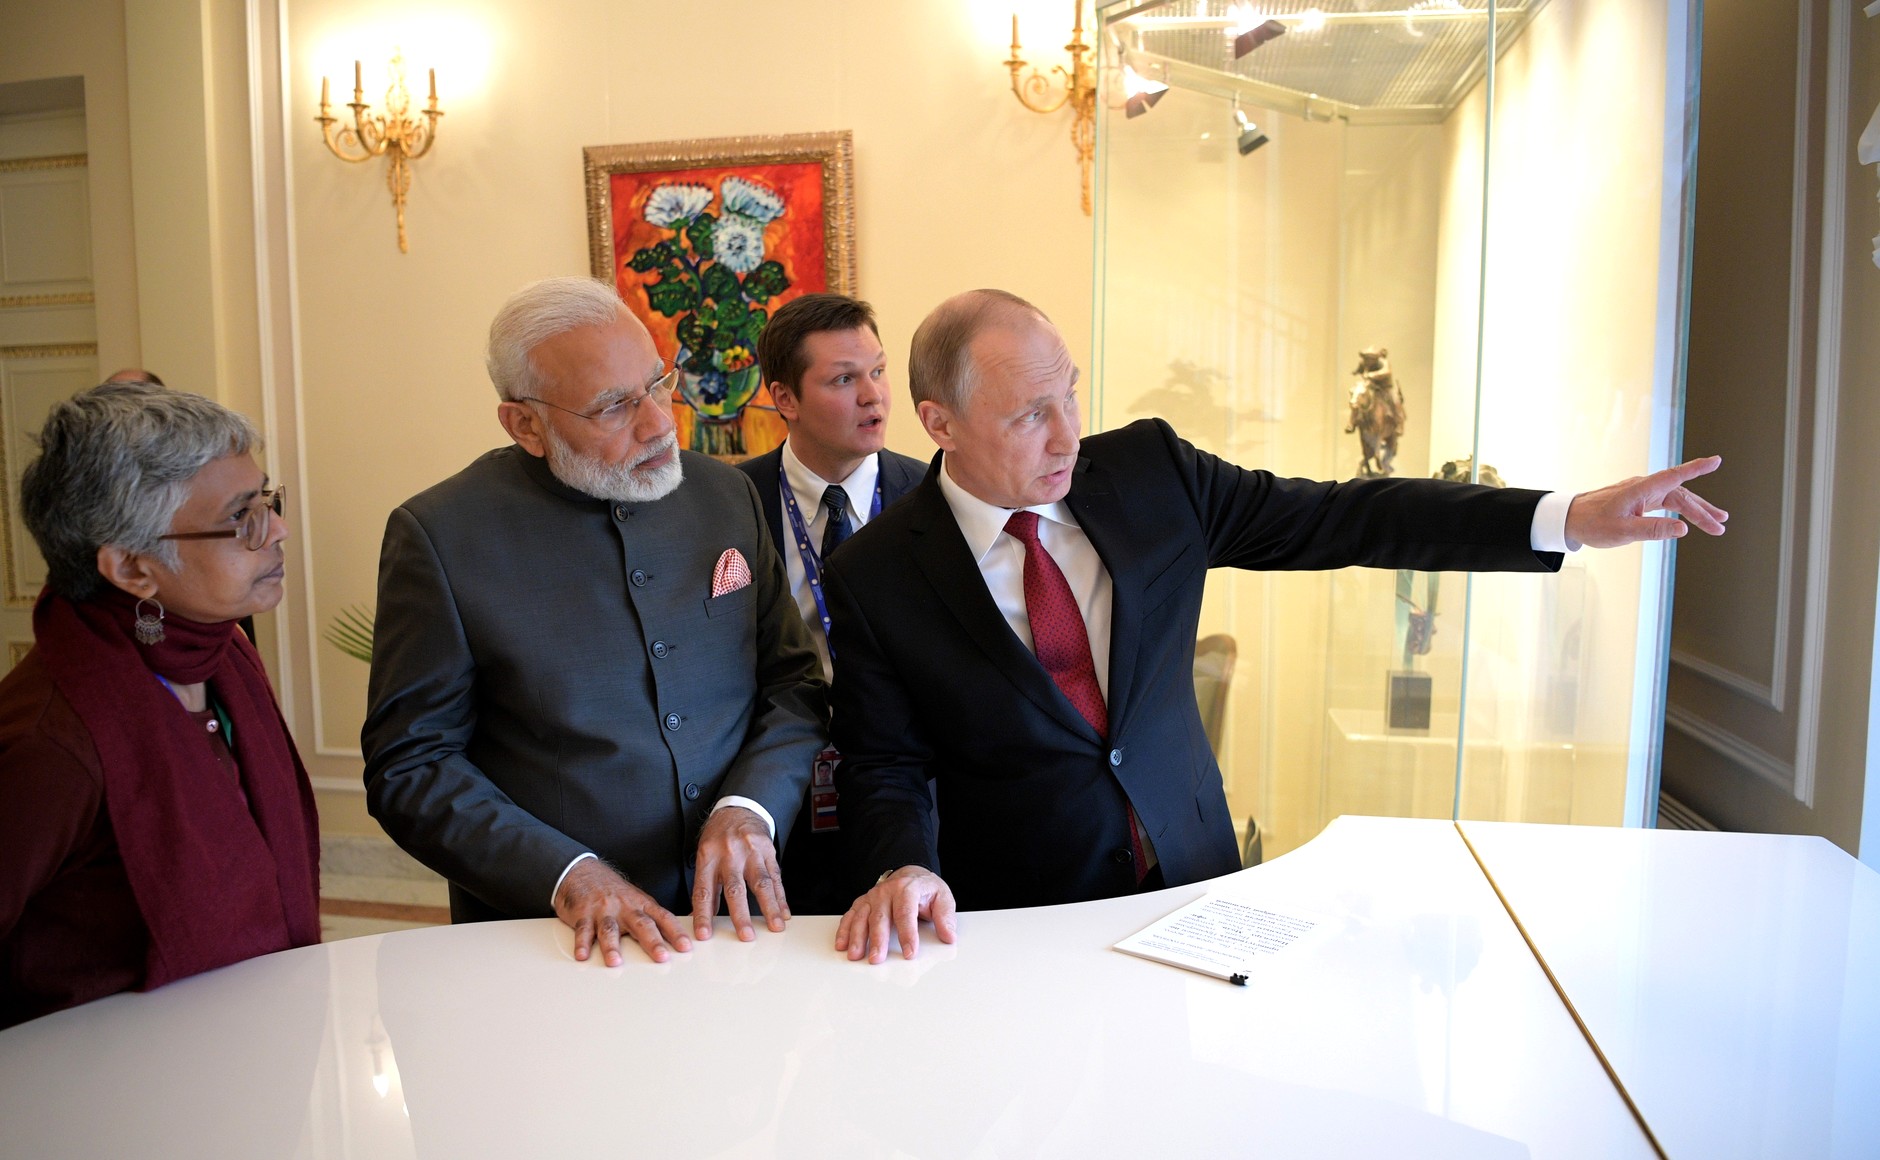 India and Russia are expected to sign two major arms deals today